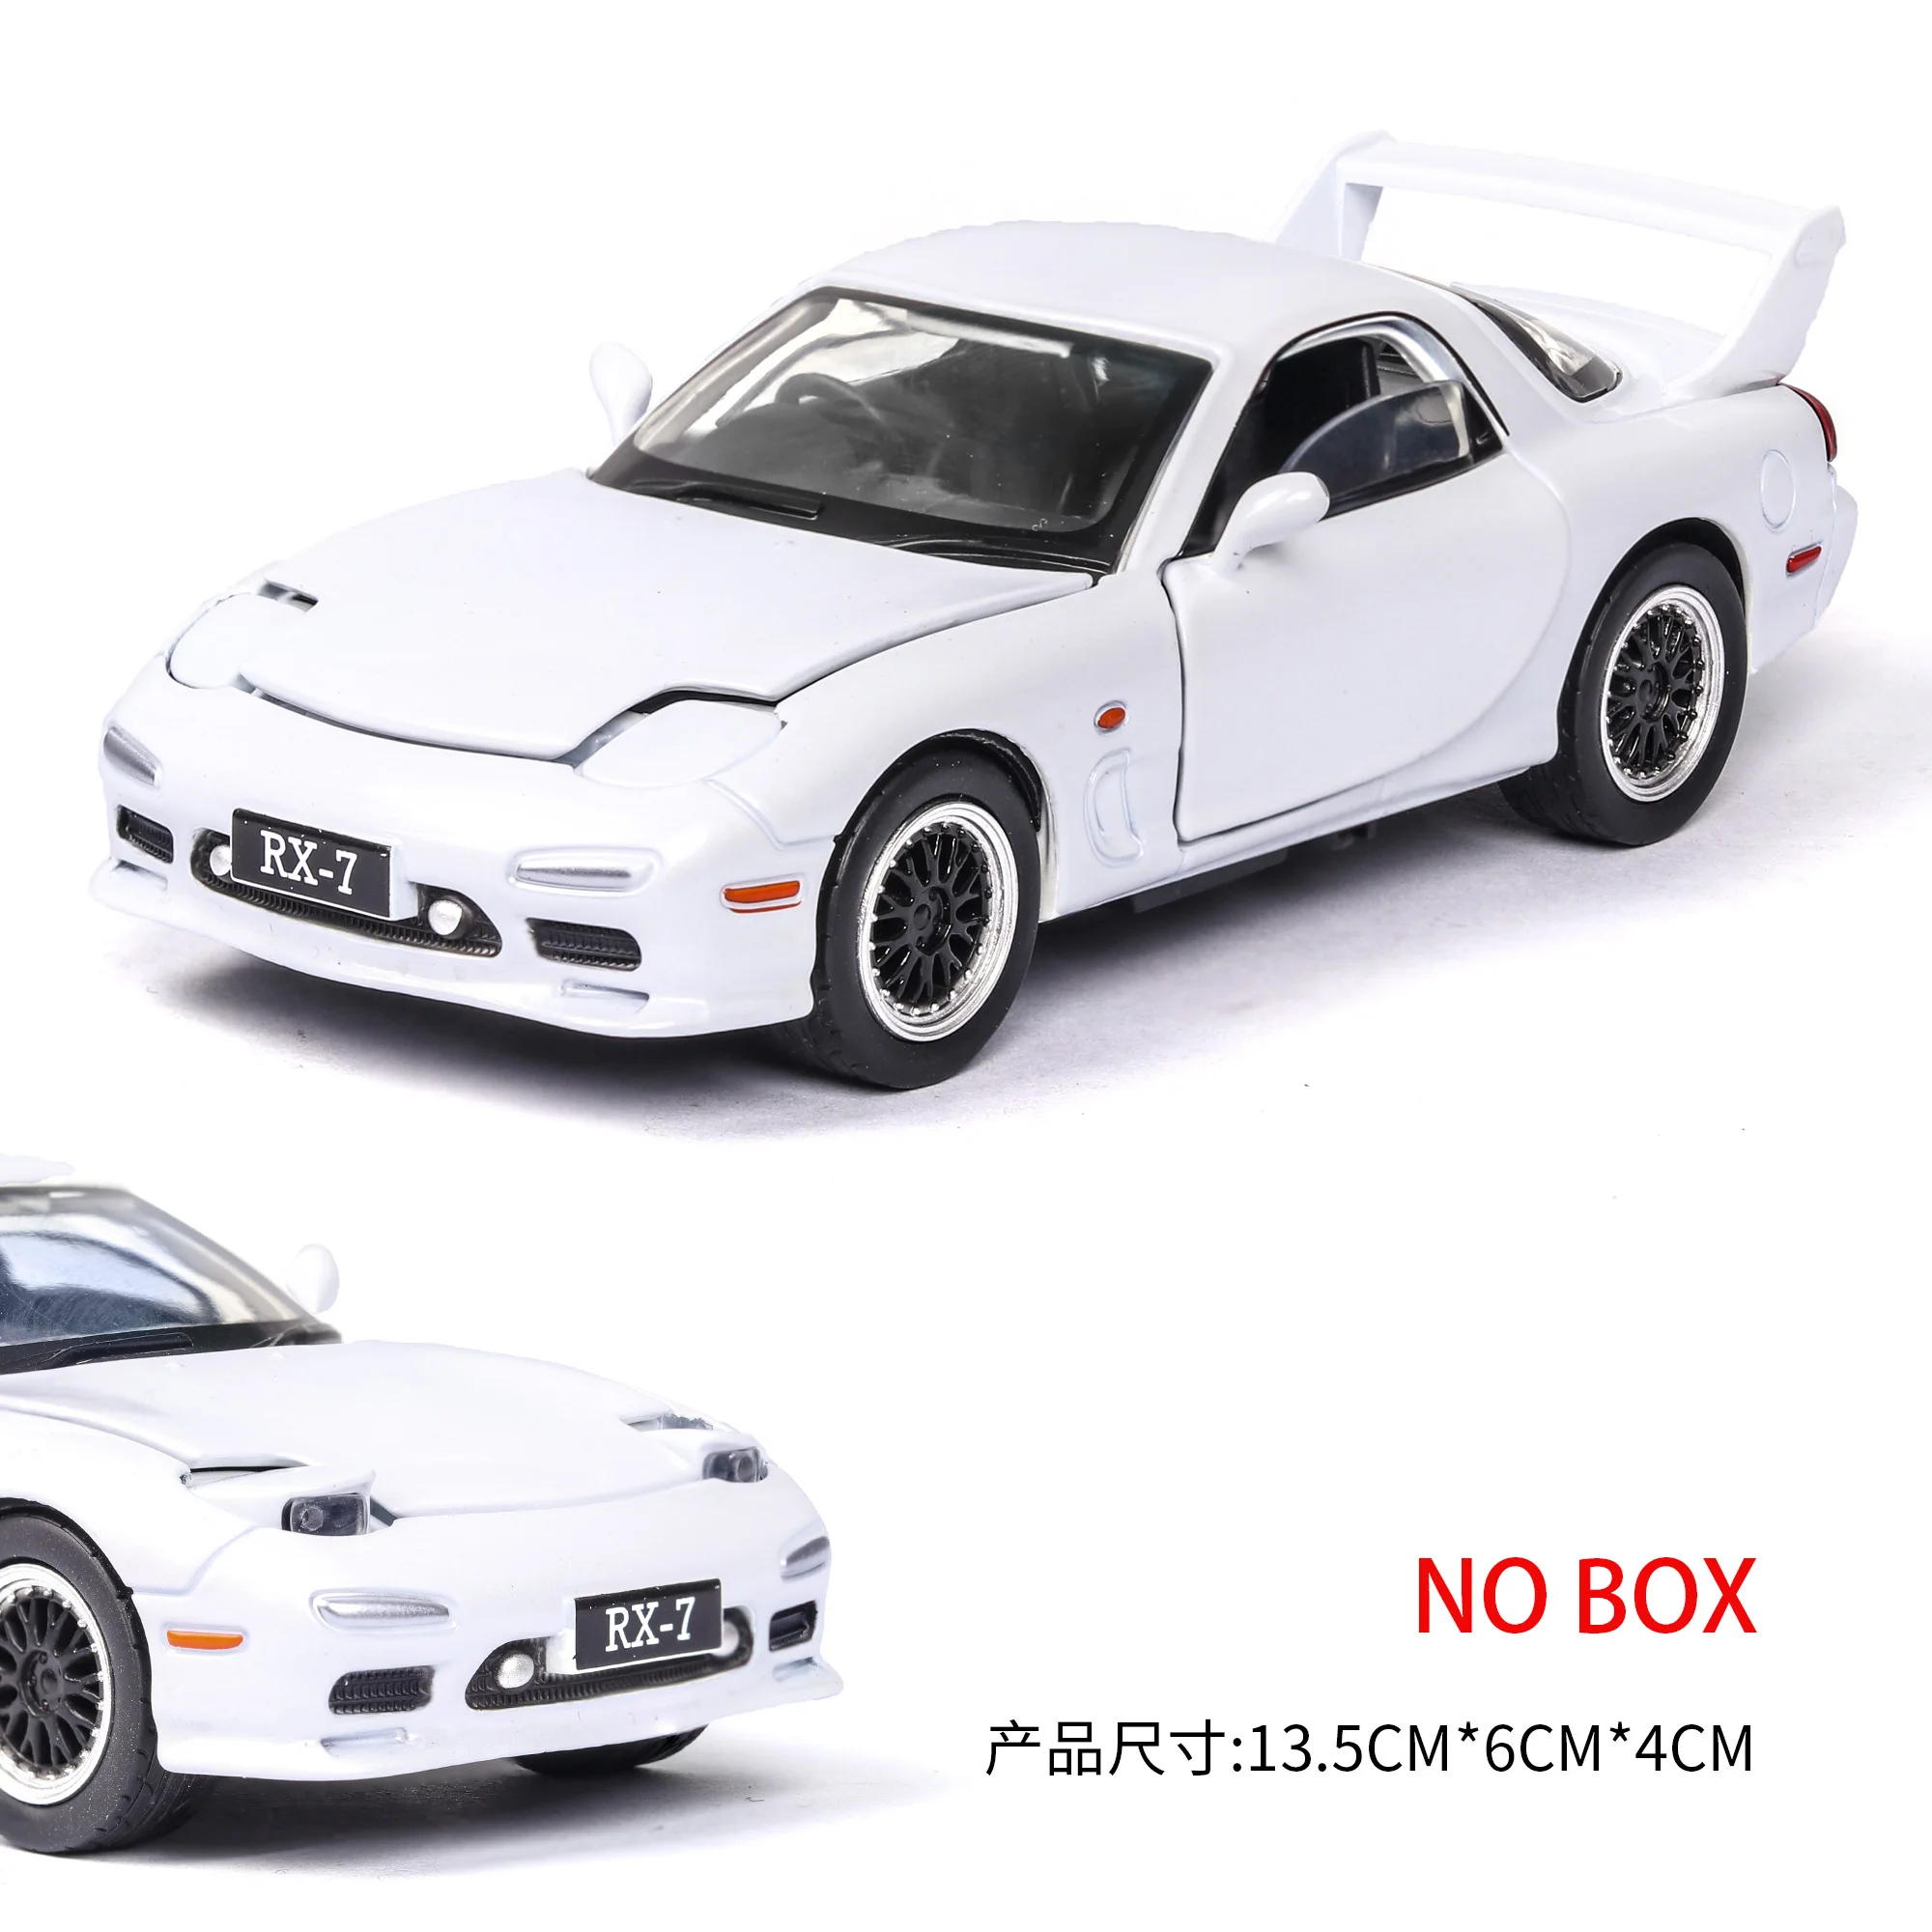 Nicce 1:32 Mazdas RX-7 Car Model with Sound Light Alloy Toy Car Diecast Toy Vehicle Car Wheel for Children Toys E160 remote control stunt car RC Cars